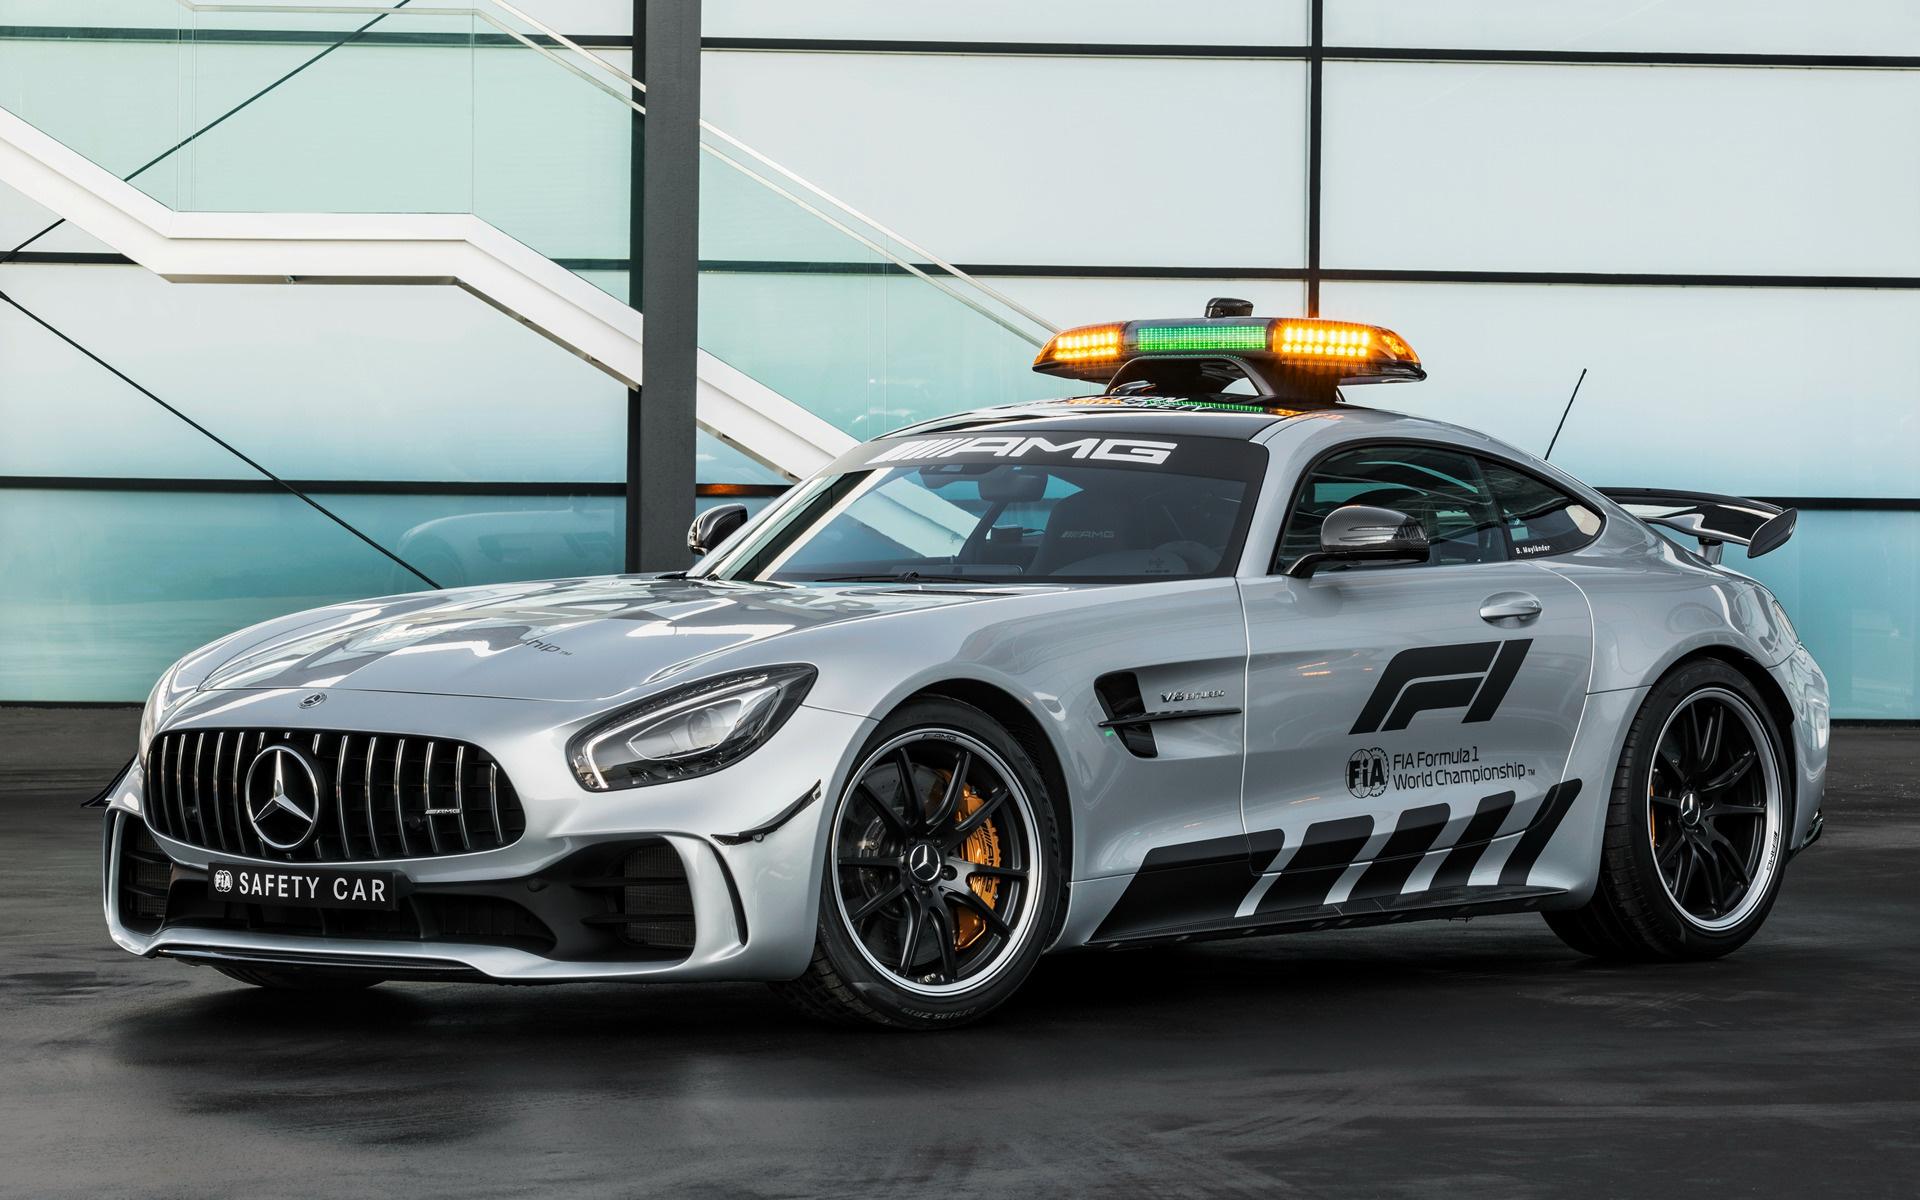 Mercedes AMG GT R F1 Safety Car And HD Image